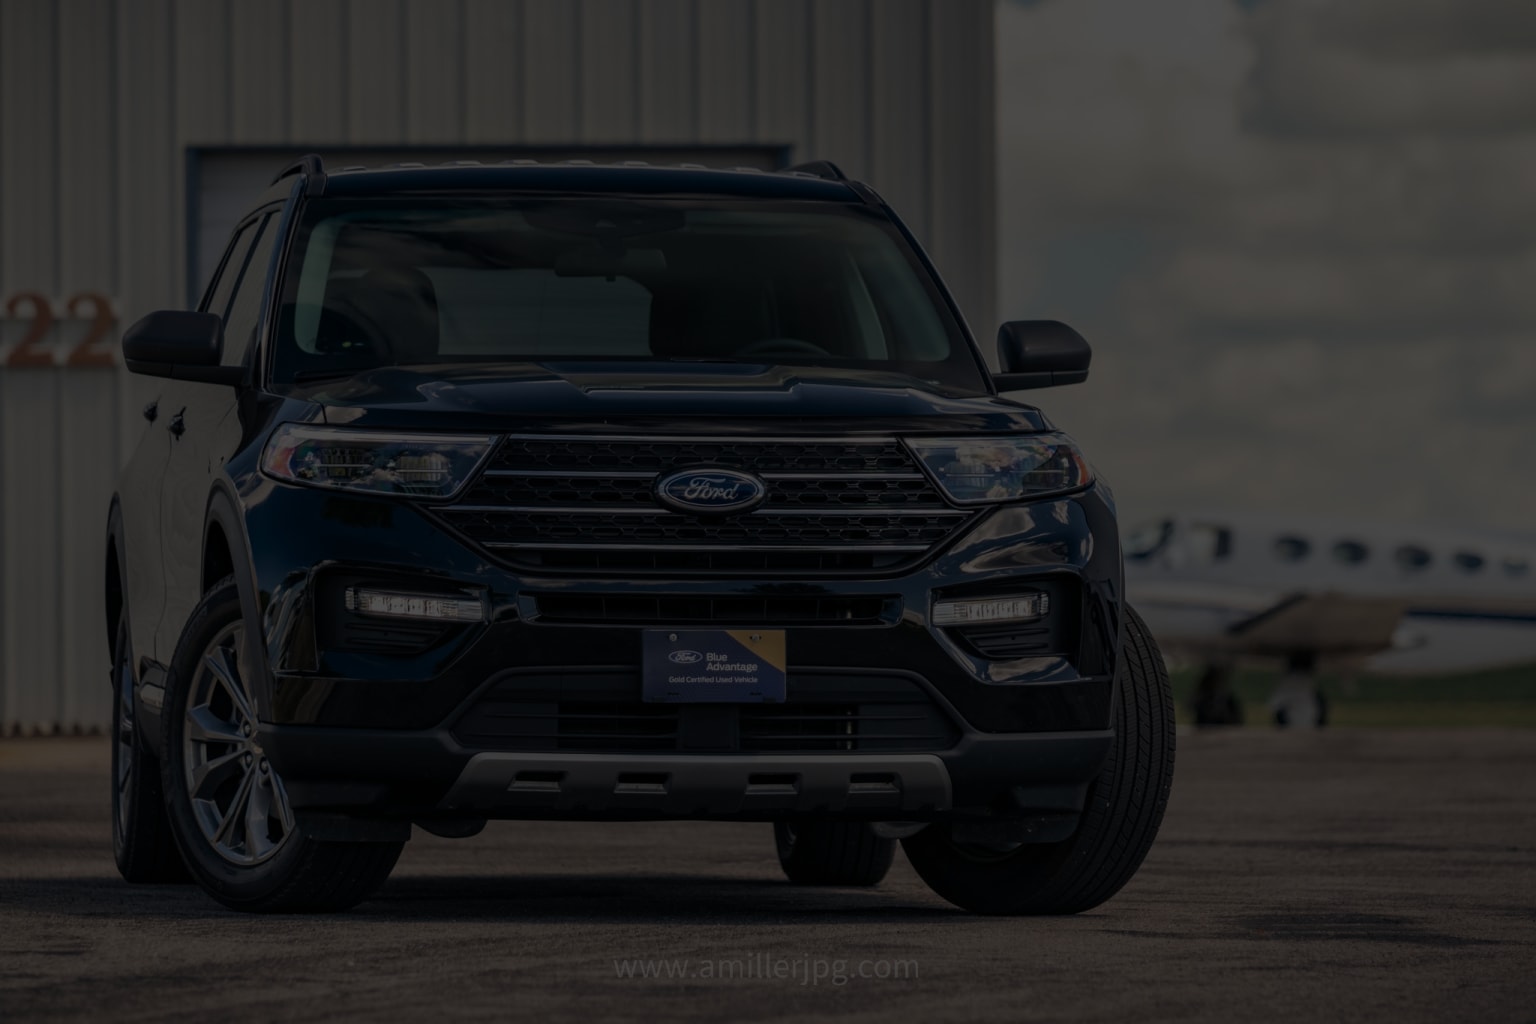 The Ford Blue Advantage
Certified Pre-Owned Program